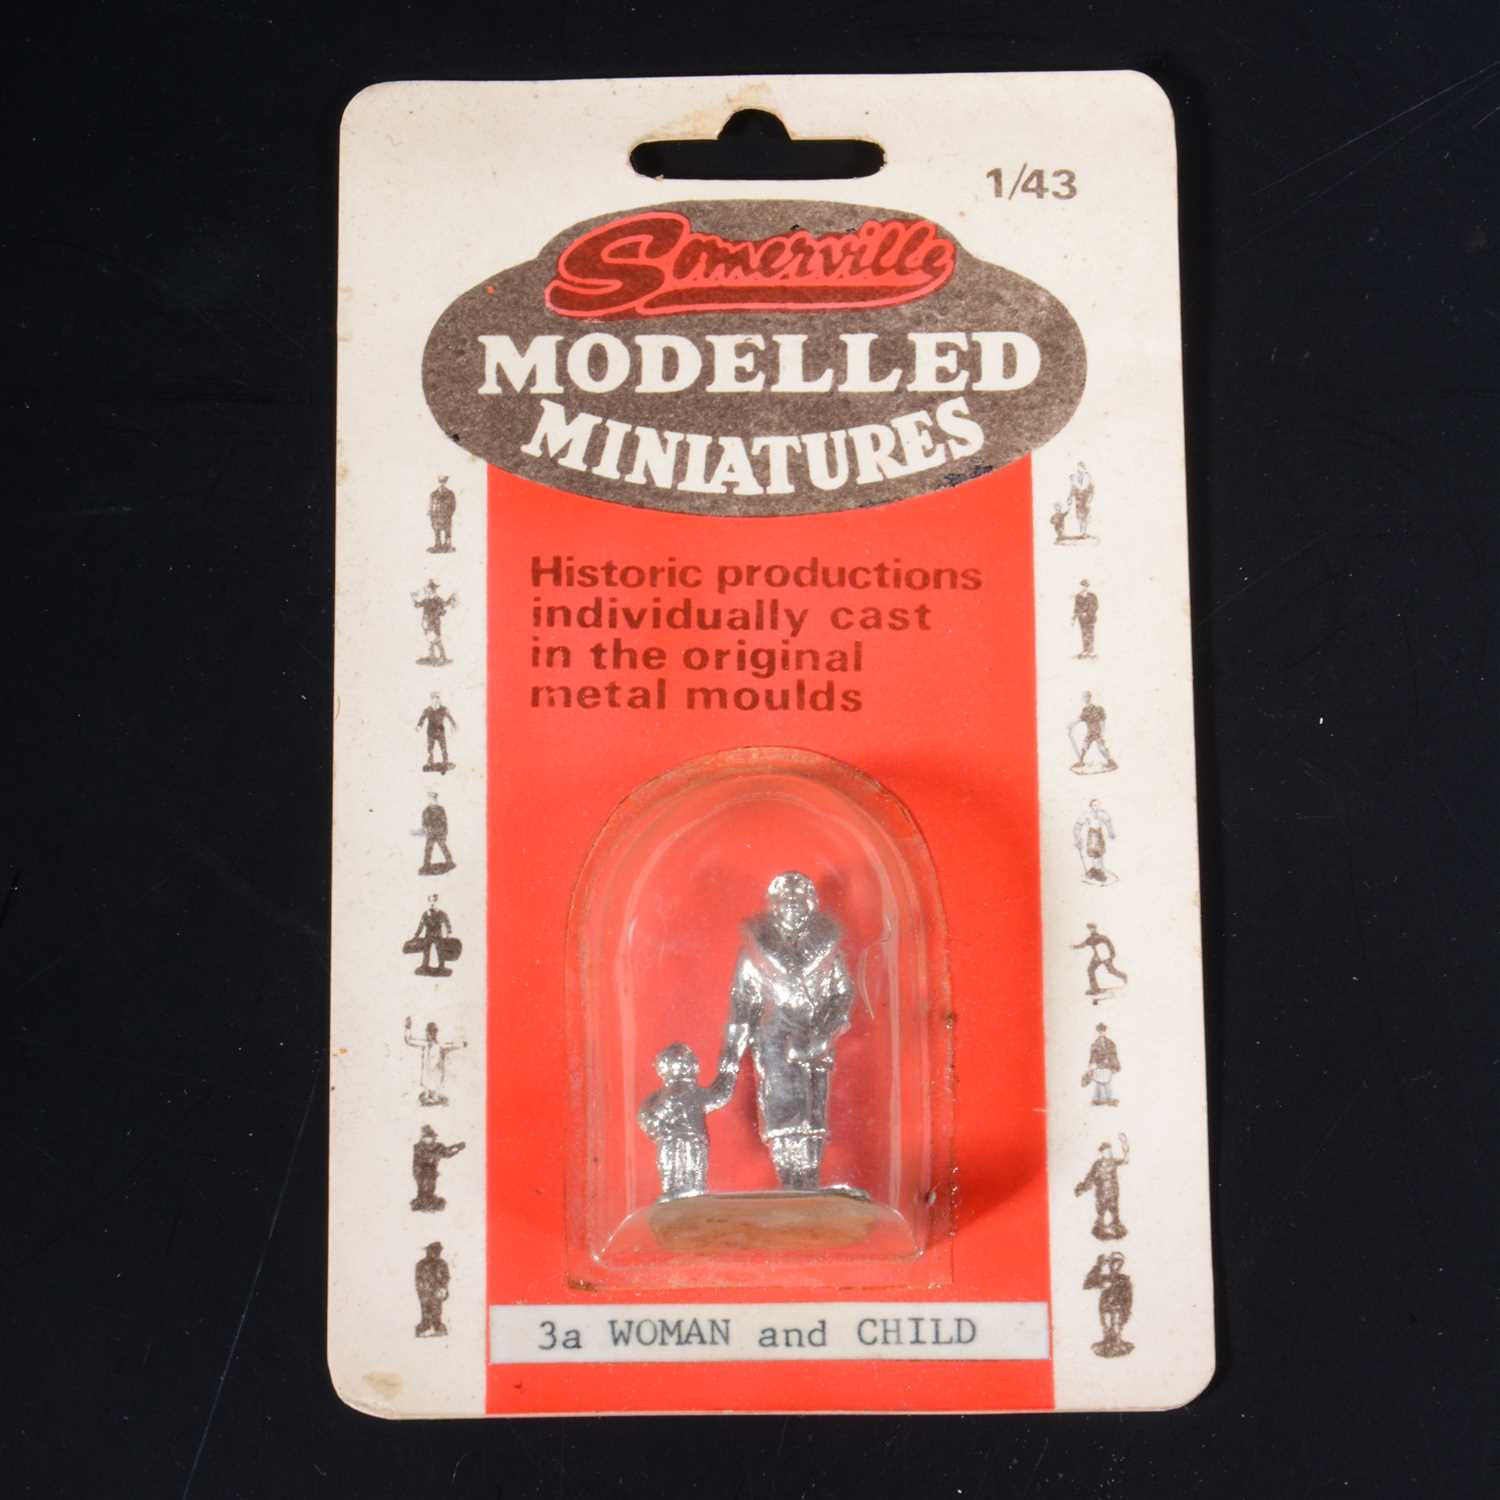 Lot 455 - Somerville Modelled Miniatures; no.3a Woman and Child, in blister pack case.